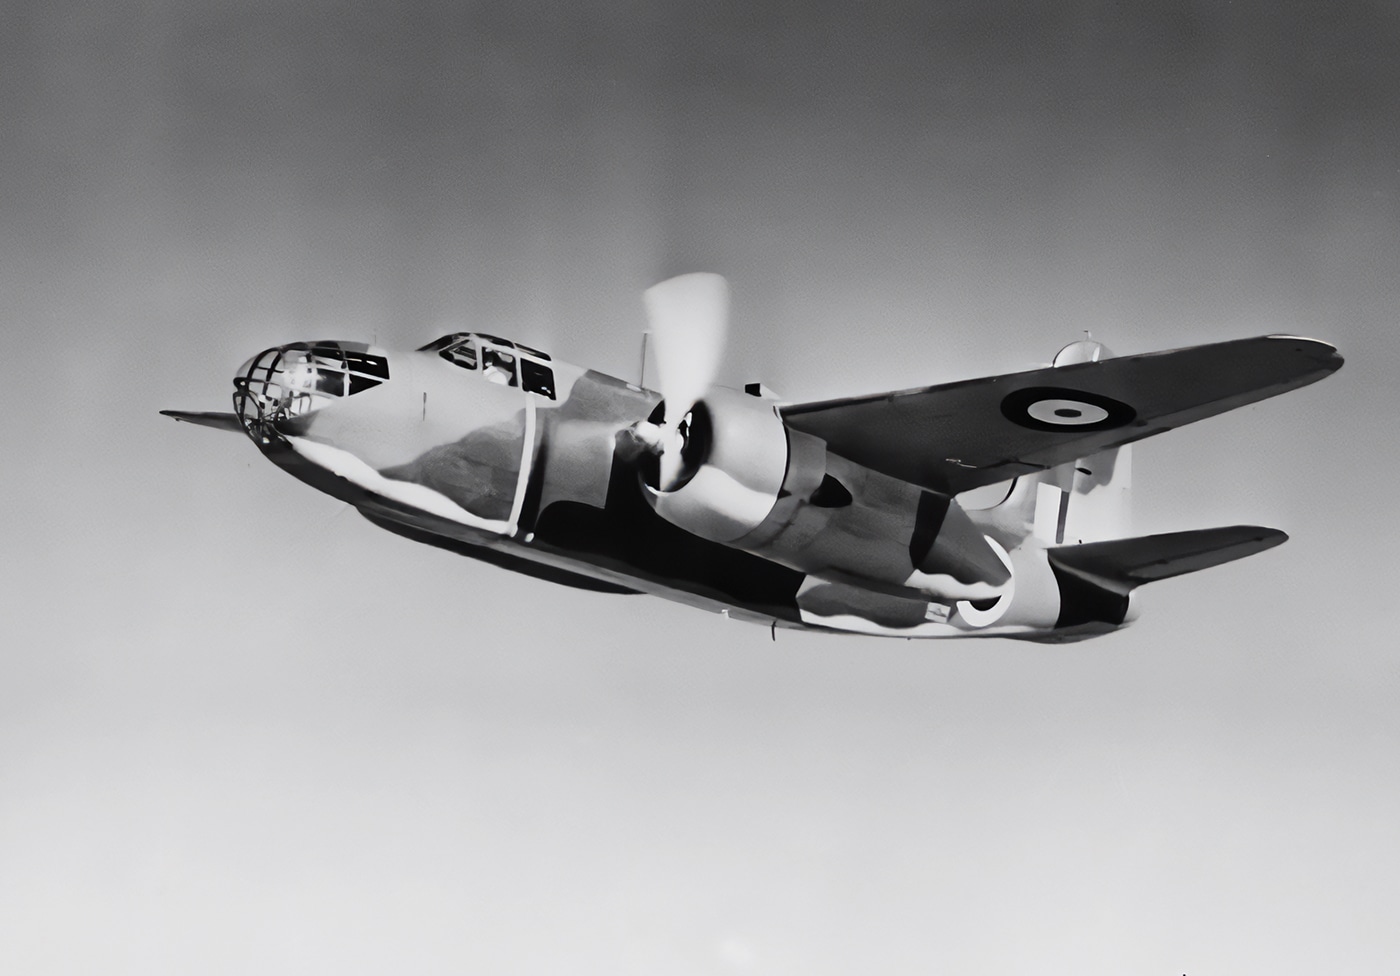 In this digital image, we see a side view of the RAF Boston. The Boston was a renamed A-20 Havoc provided to the UK under the Lend-Lease Program. It was designed as an attack bomber for hedge hopping and strafing operations against ground troops and installations. Lend-Lease, formally the Lend-Lease Act and introduced as An Act to Promote the Defense of the United States, was a policy under which the United States supplied the United Kingdom, the Soviet Union, France, Republic of China, and other Allied nations of the Second World War with food, oil, and materiel between 1941 and 1945.